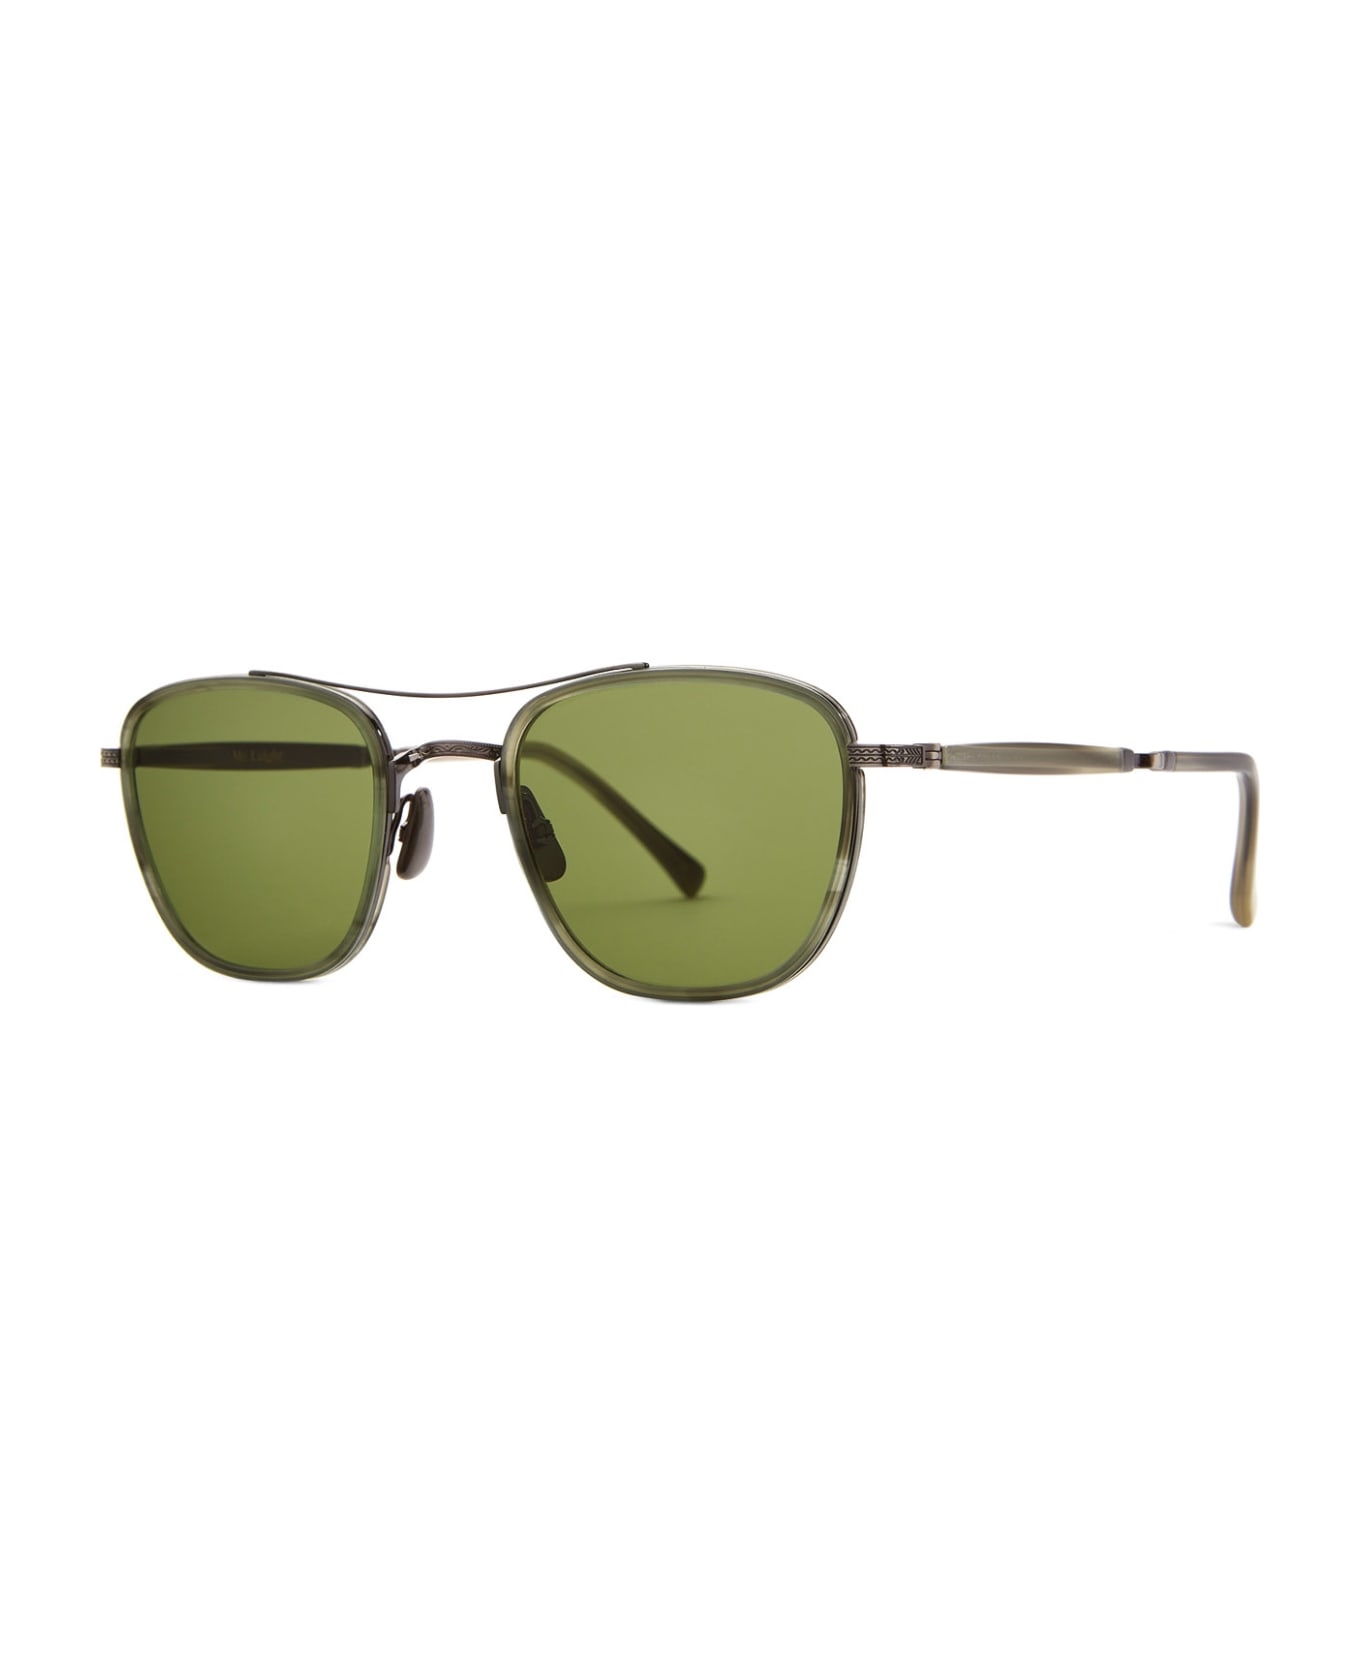 Mr. Leight Price S Sycamore-pewter Sunglasses - Sycamore-Pewter